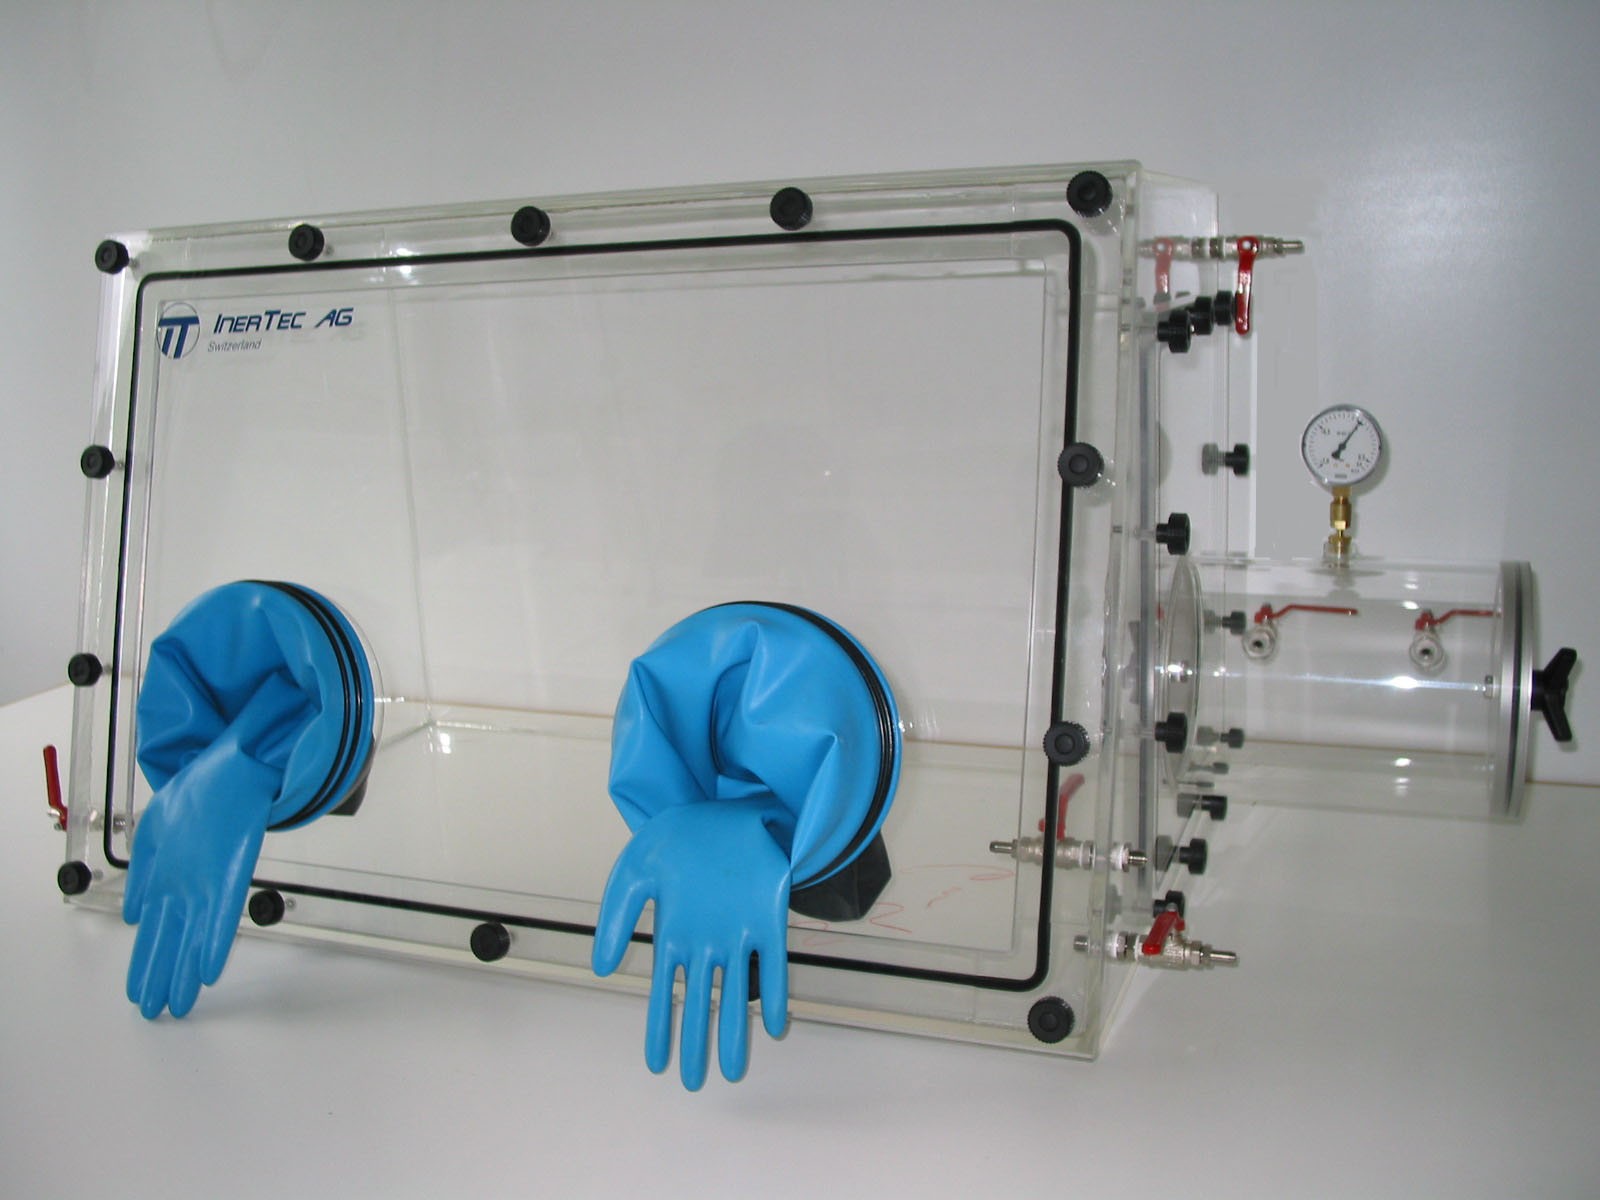 Glovebox made of acrylic&gt; Gas filling: automatic flushing with pressure control, front version: standard, side version: wing doors